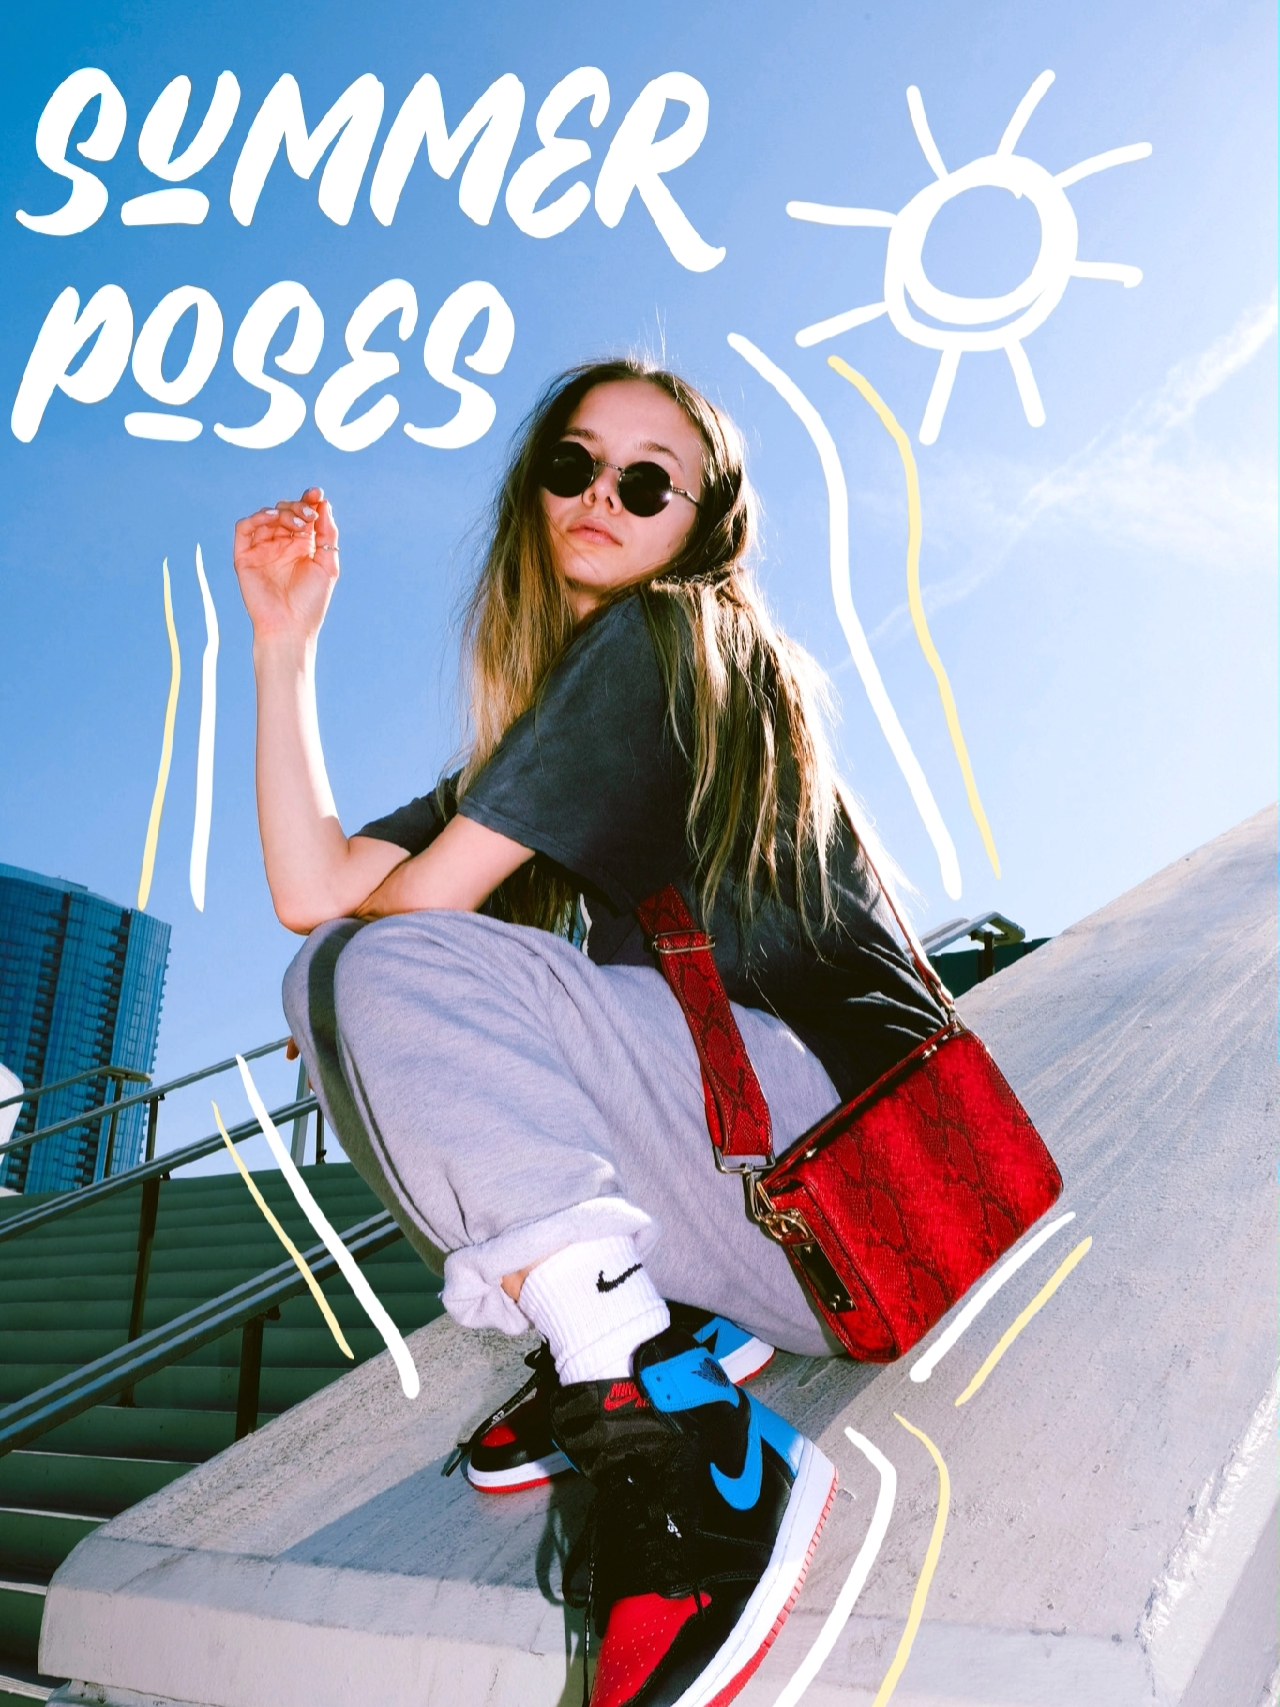  A woman wearing a xanh rớt shirt and xanh rớt pants is sitting on a ledge. She is holding a red purse and has sunglasses on. The image is labeled with the words "Summer Poses"